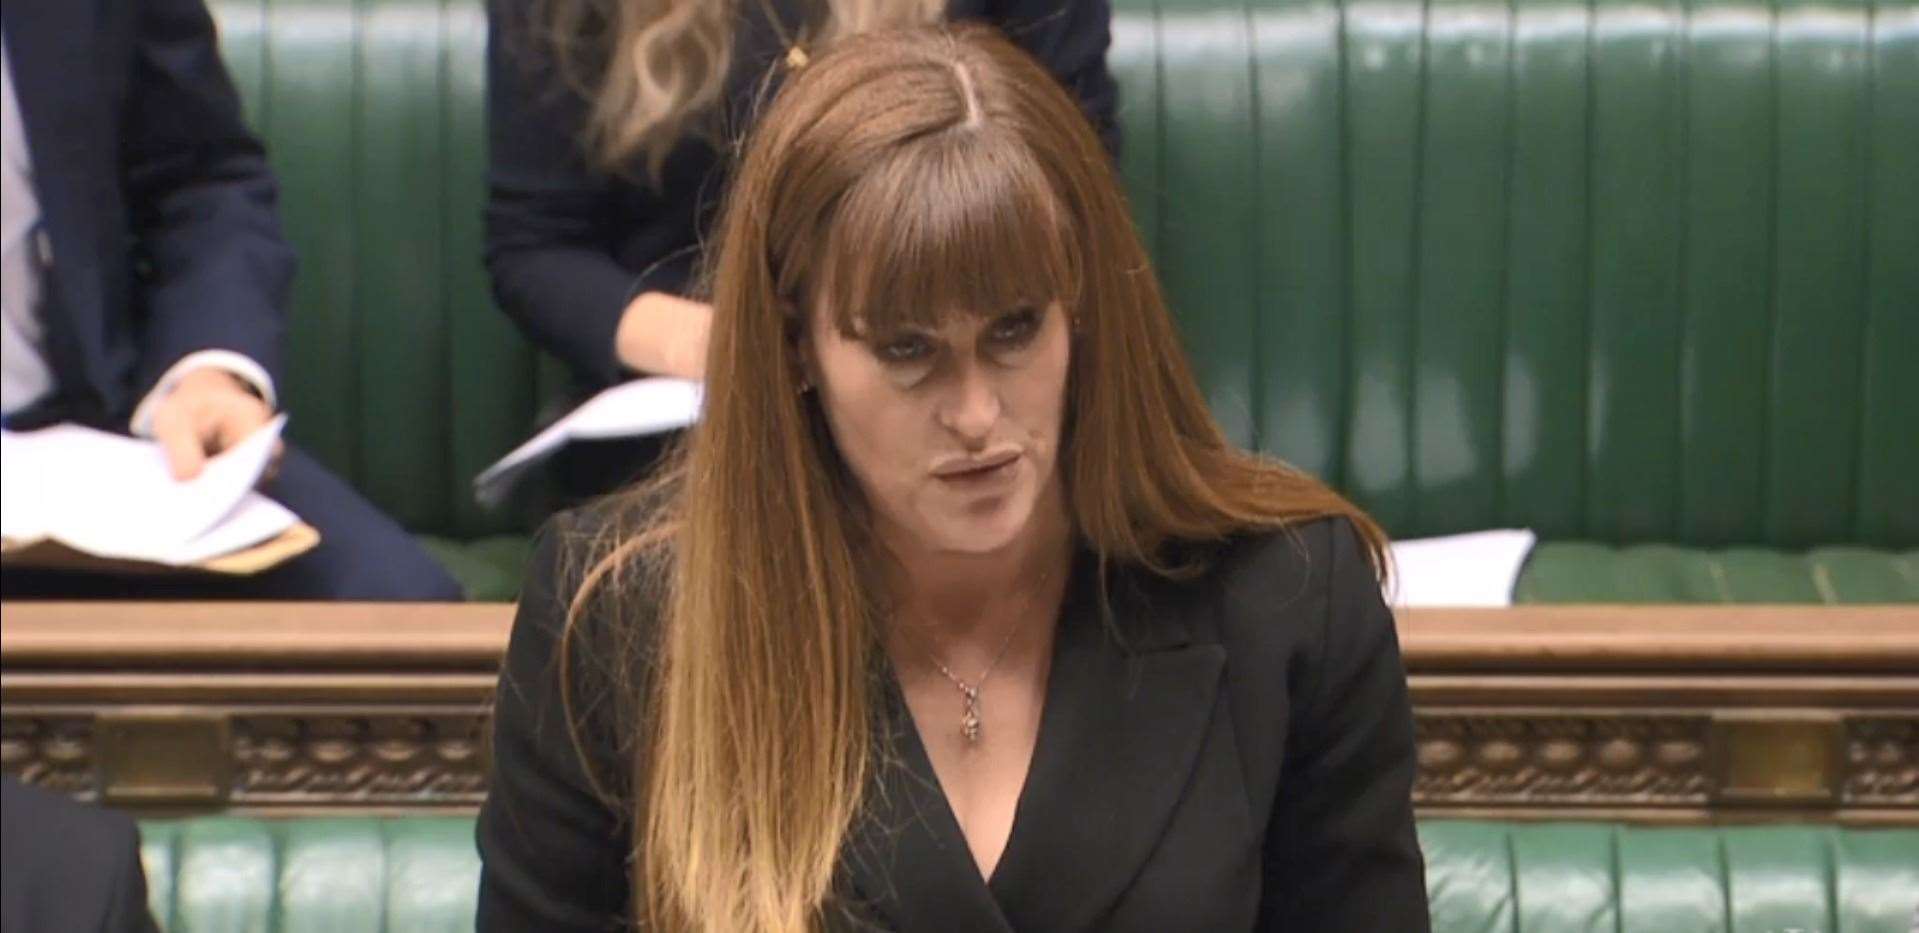 Kelly Tolhurst giving a statement in parliament when she was aviation minister